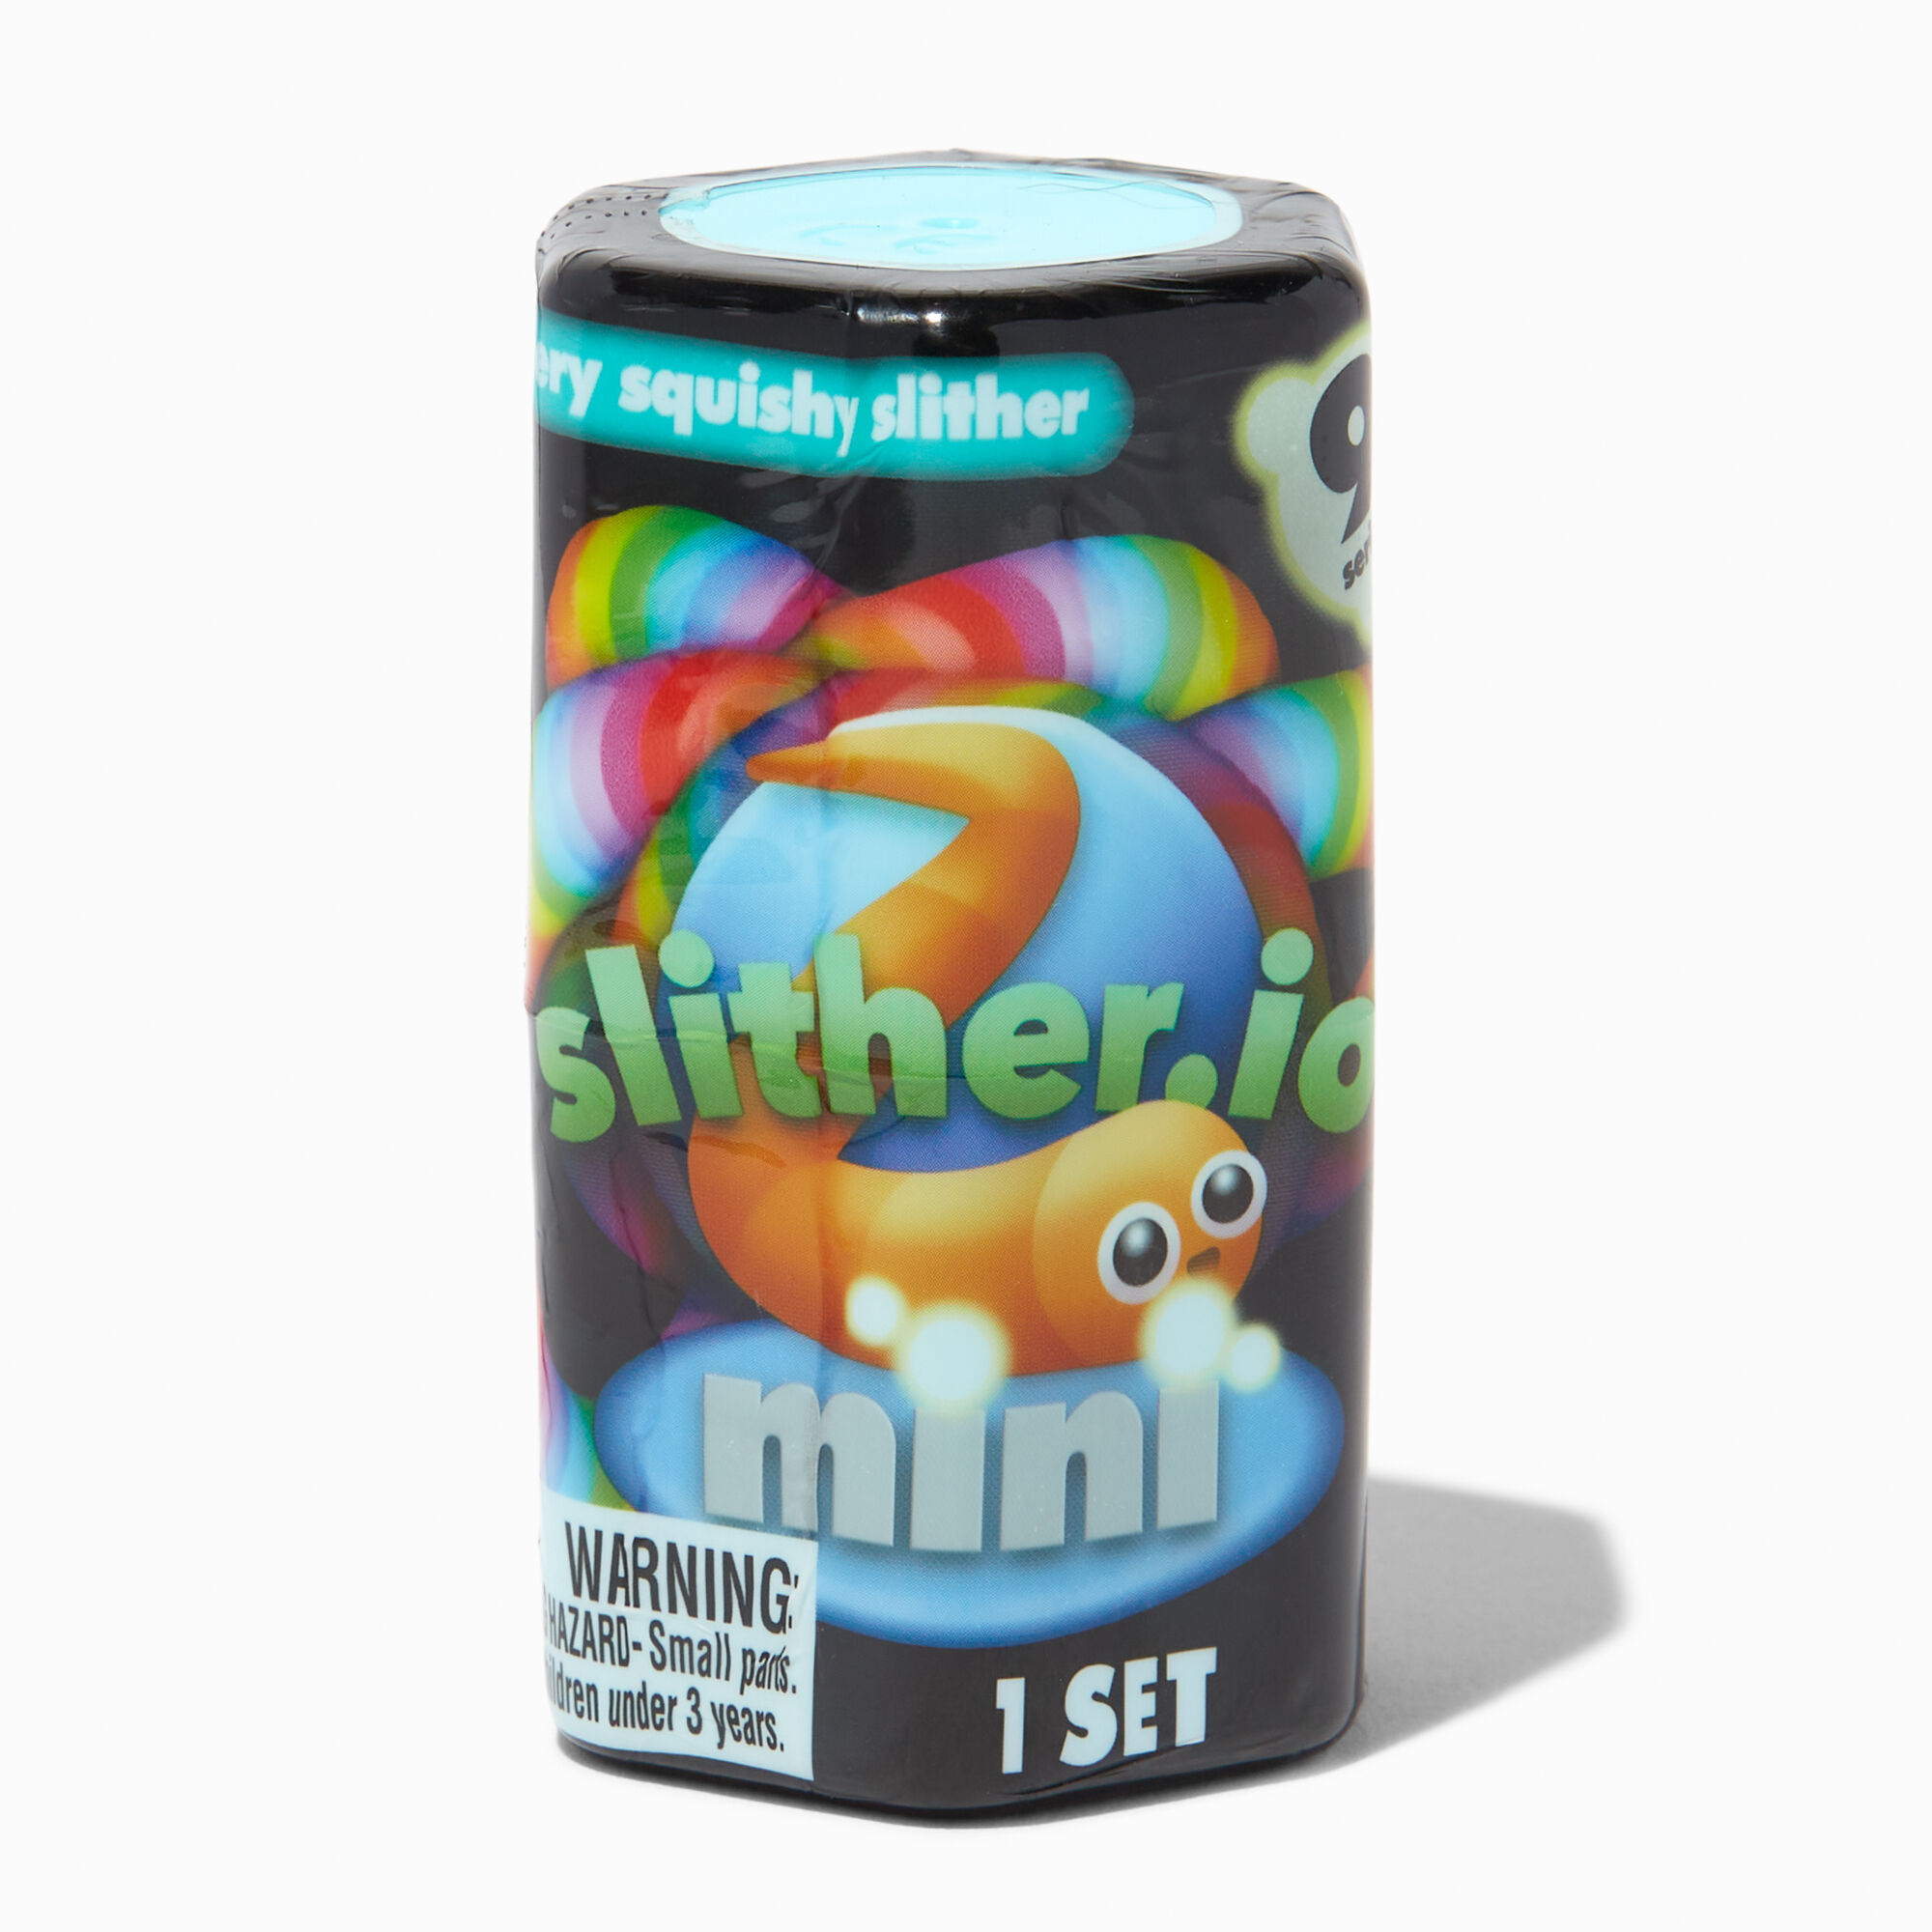 Introducing the New Slither.io Toys - Melanie's Fab Finds